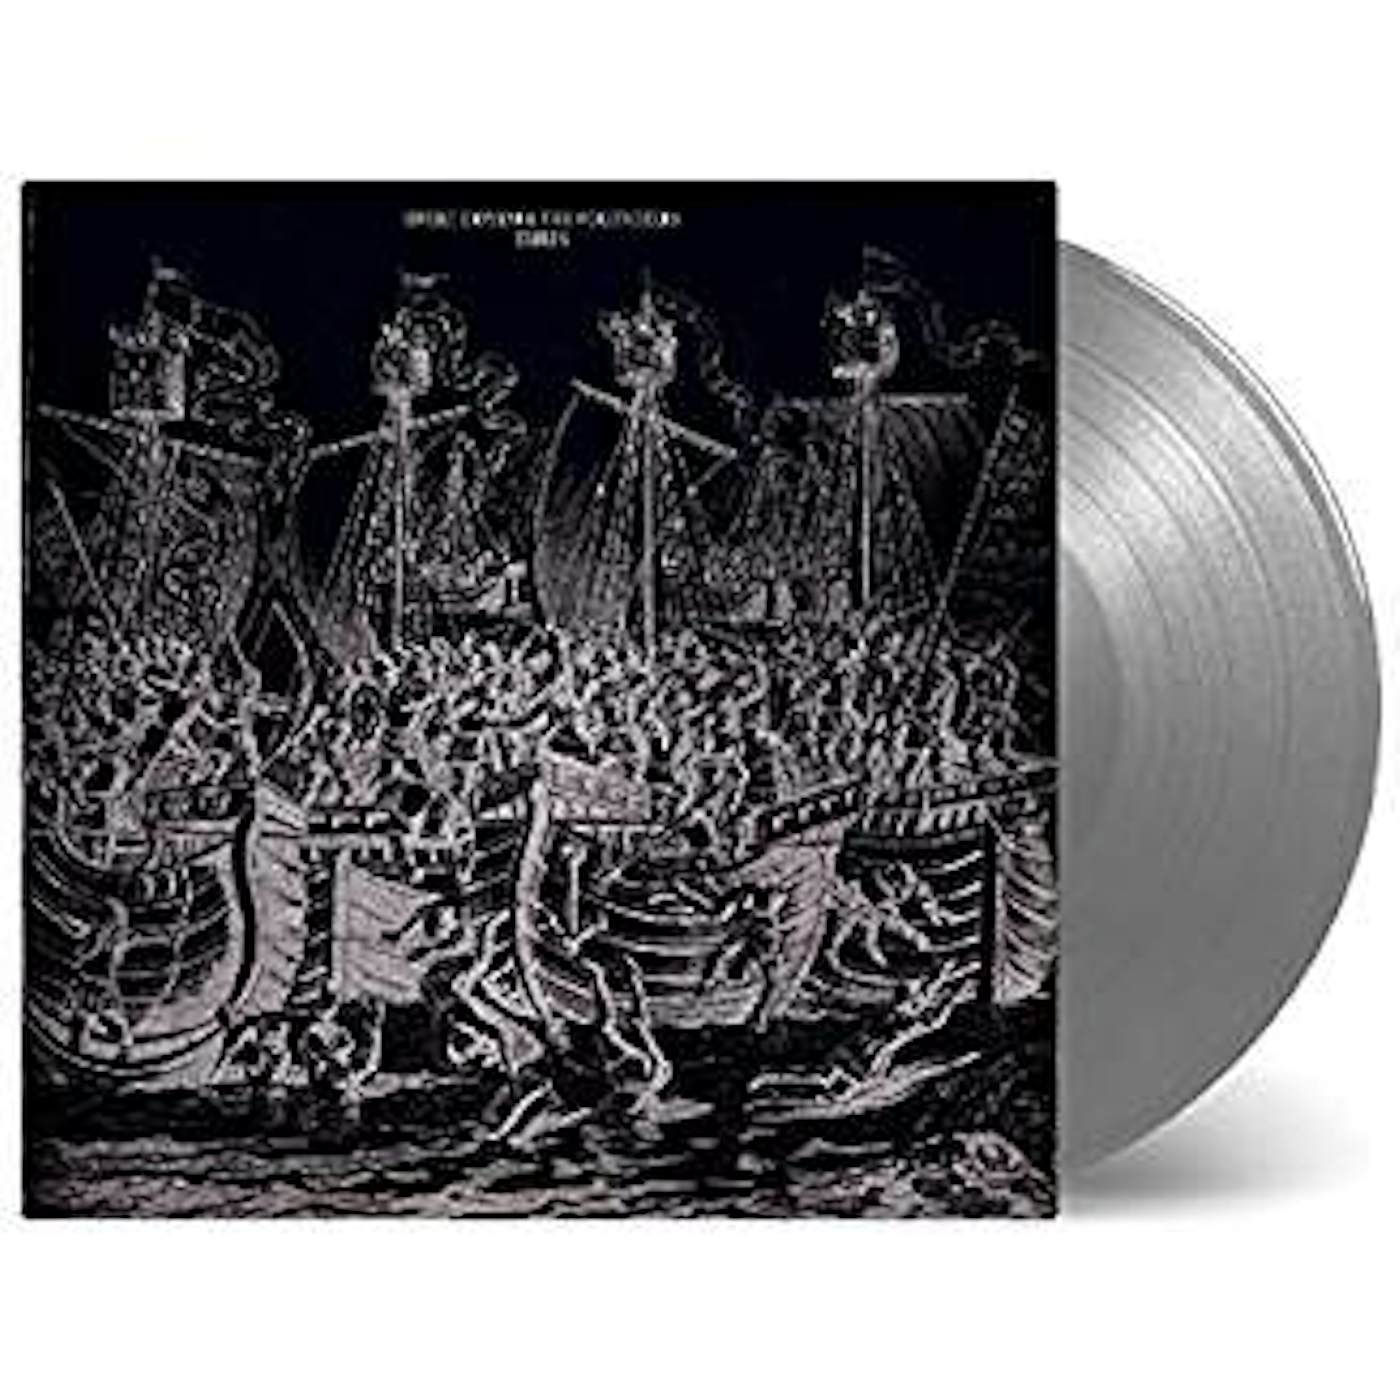 Sivert Høyem EXILES - Limited Edition 180 Gram Silver Colored Vinyl Record